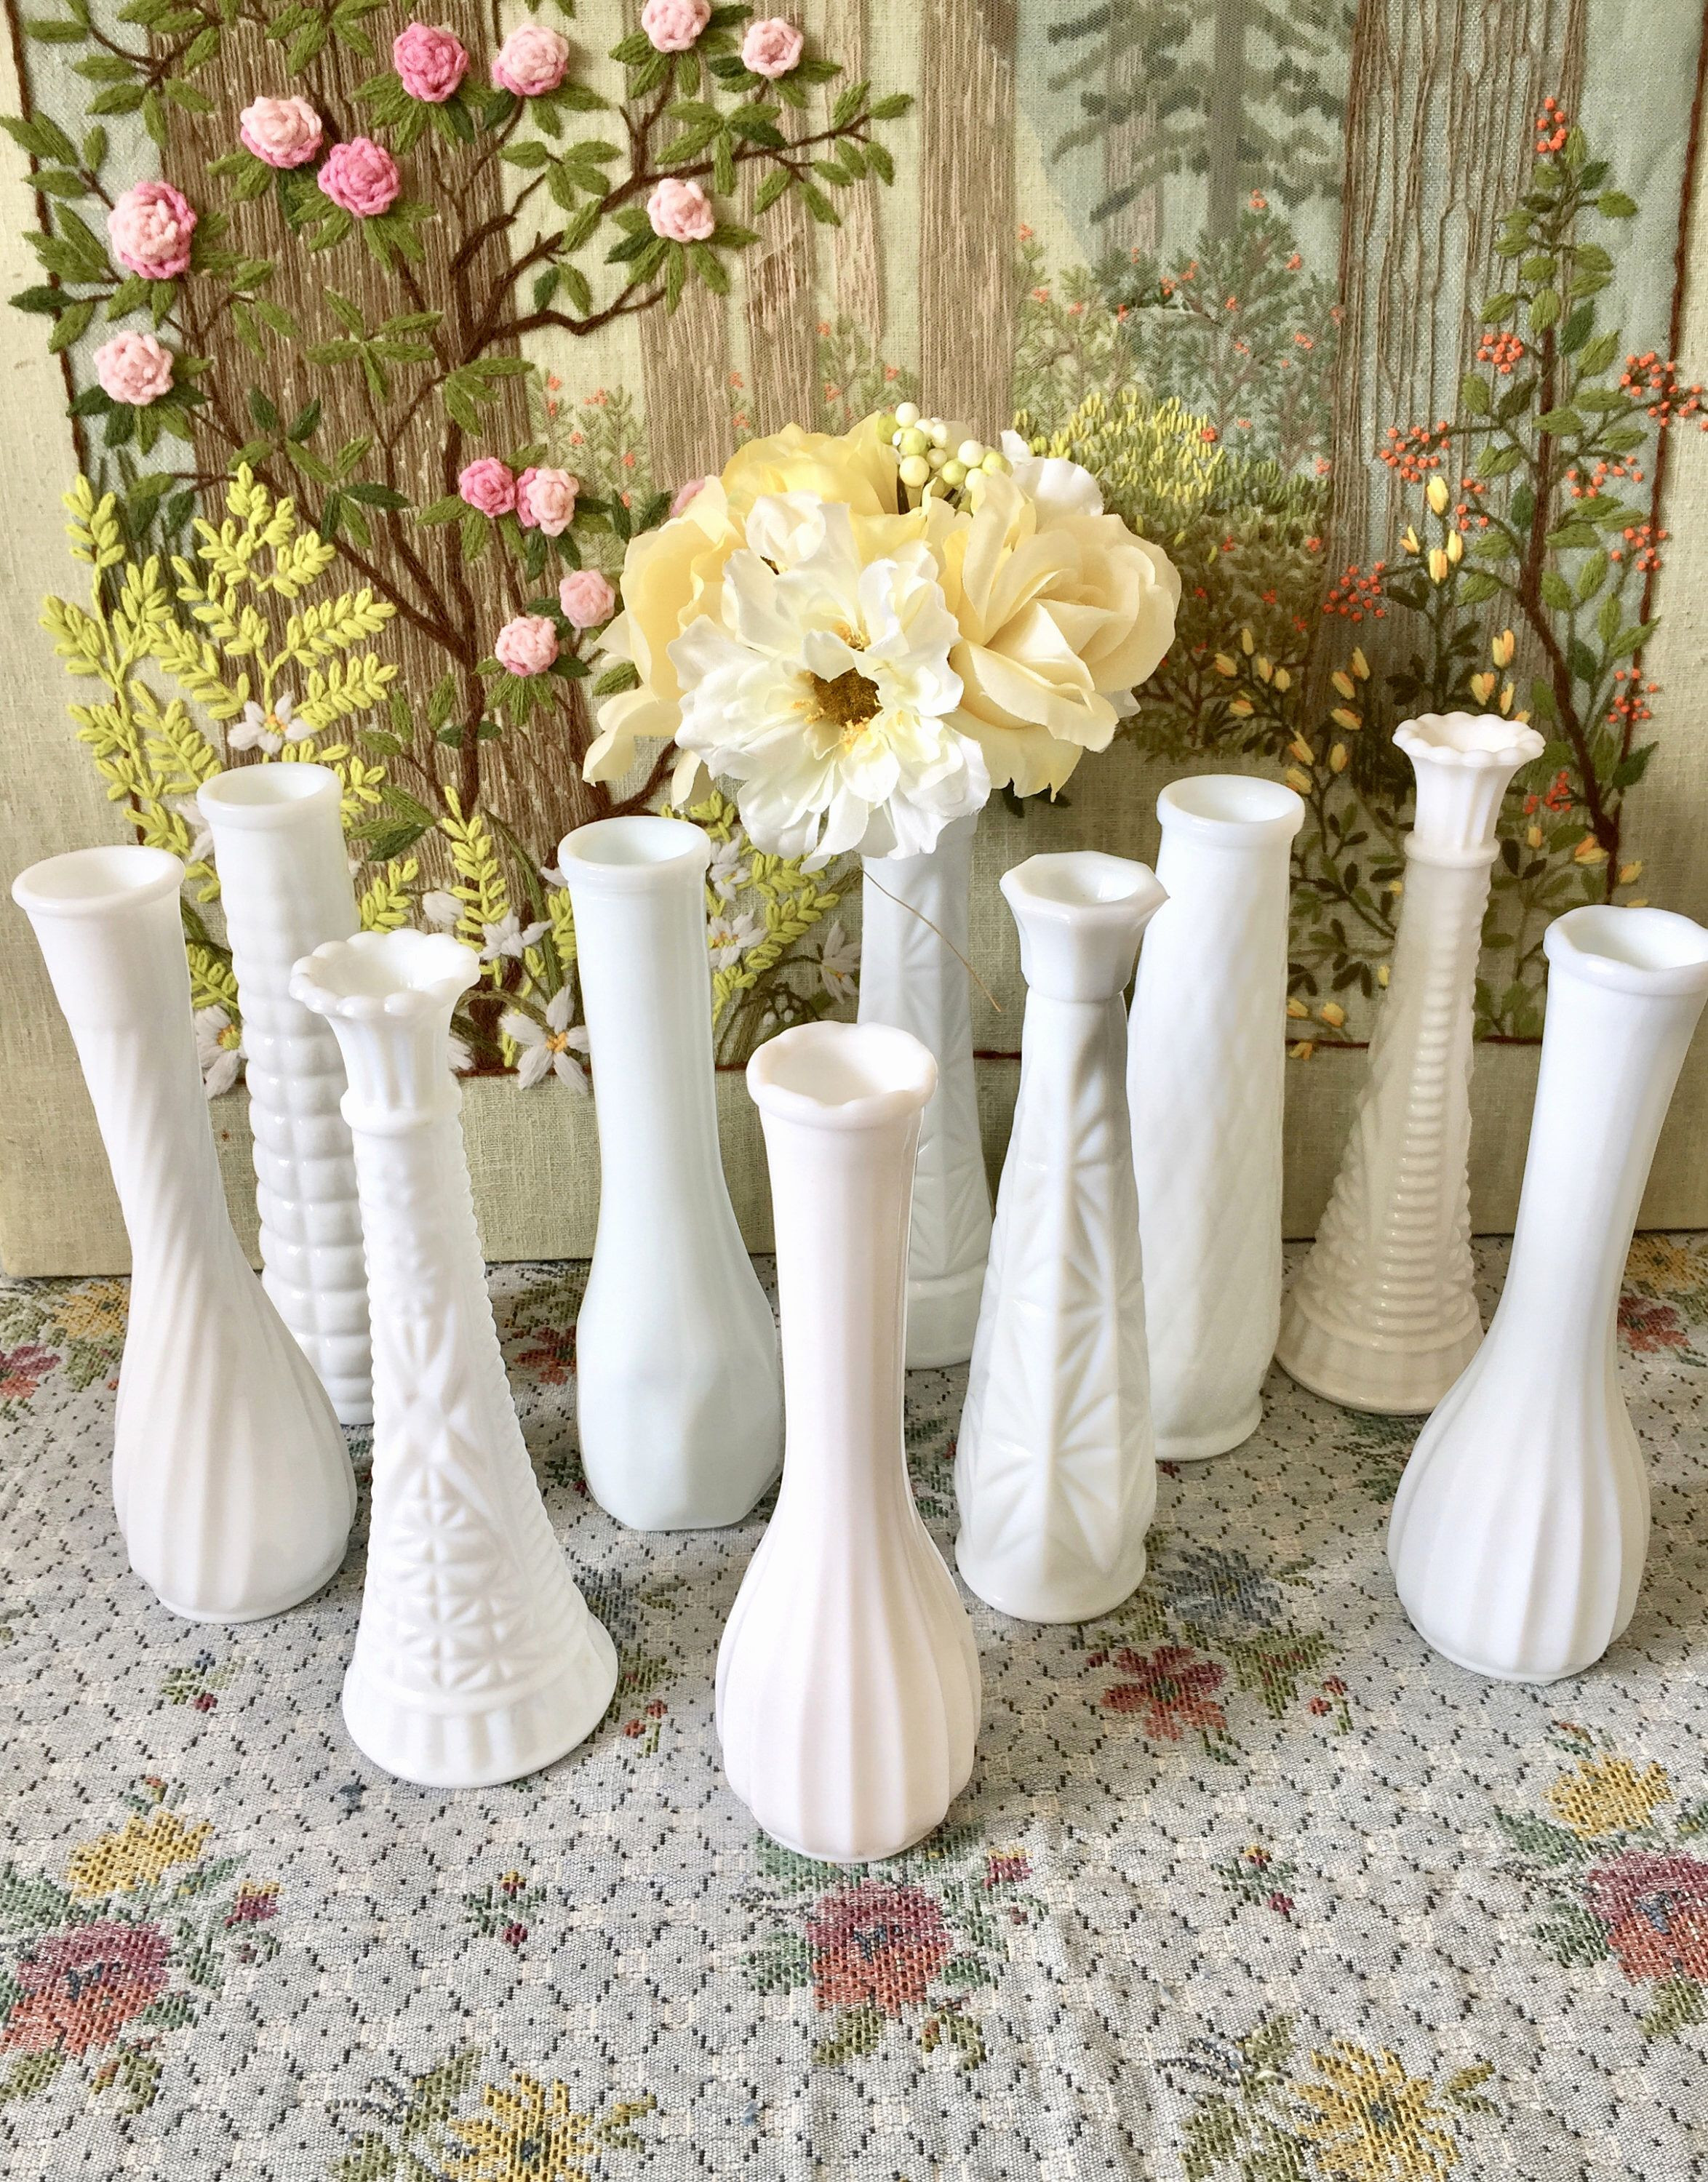 12 Nice 16 Glass Cylinder Vases wholesale 2024 free download 16 glass cylinder vases wholesale of 40 glass vases bulk the weekly world with regard to centerpiece vases in bulk vase and cellar image avorcor